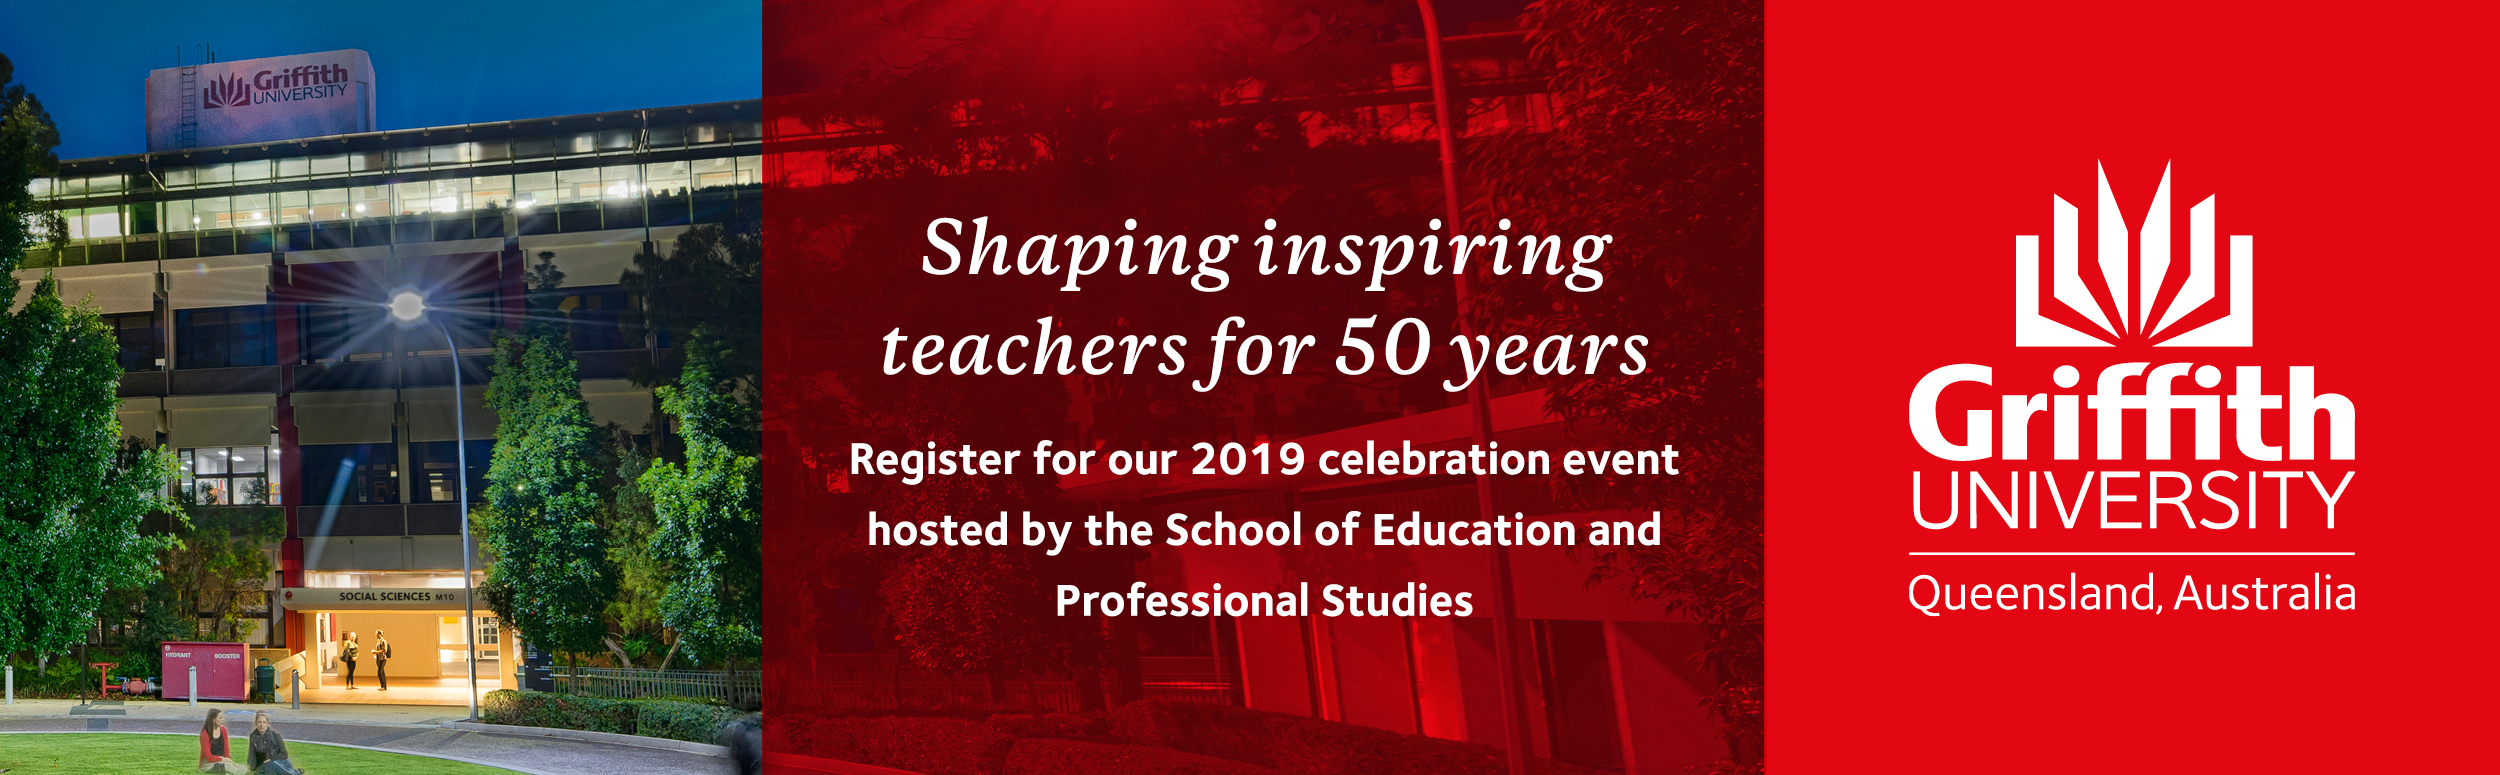 Griffith University School of Education and Professional Studies 50 Years Celebration